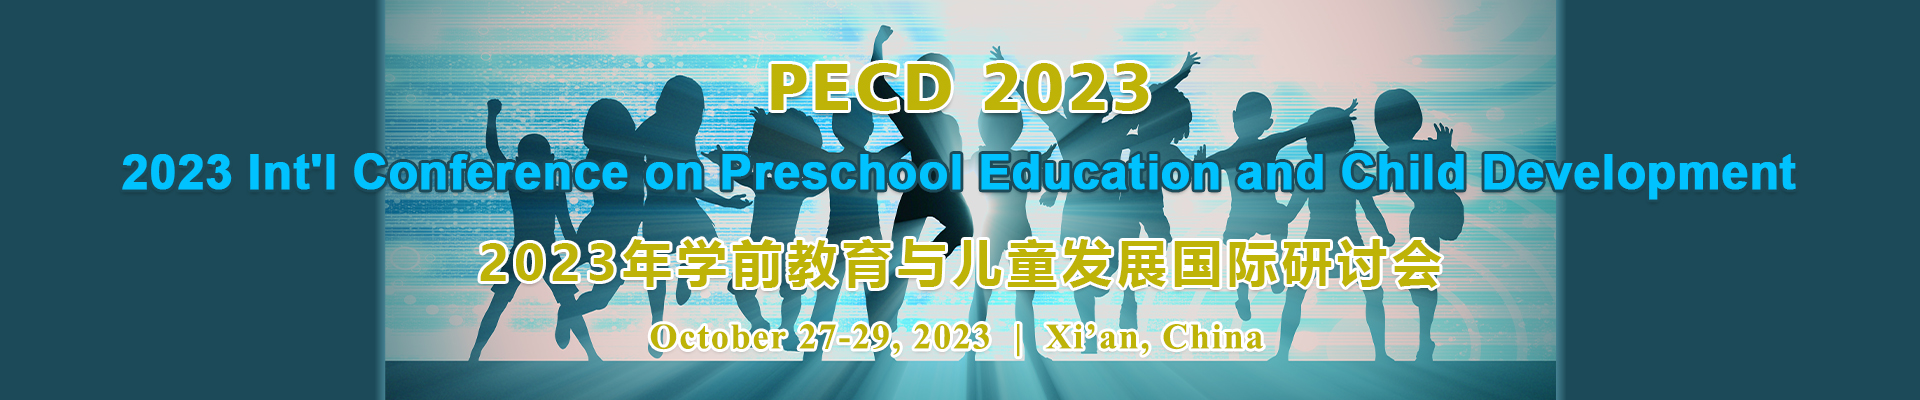 2023 Int'l Conference on Preschool Education and Child Development (PECD 2023)